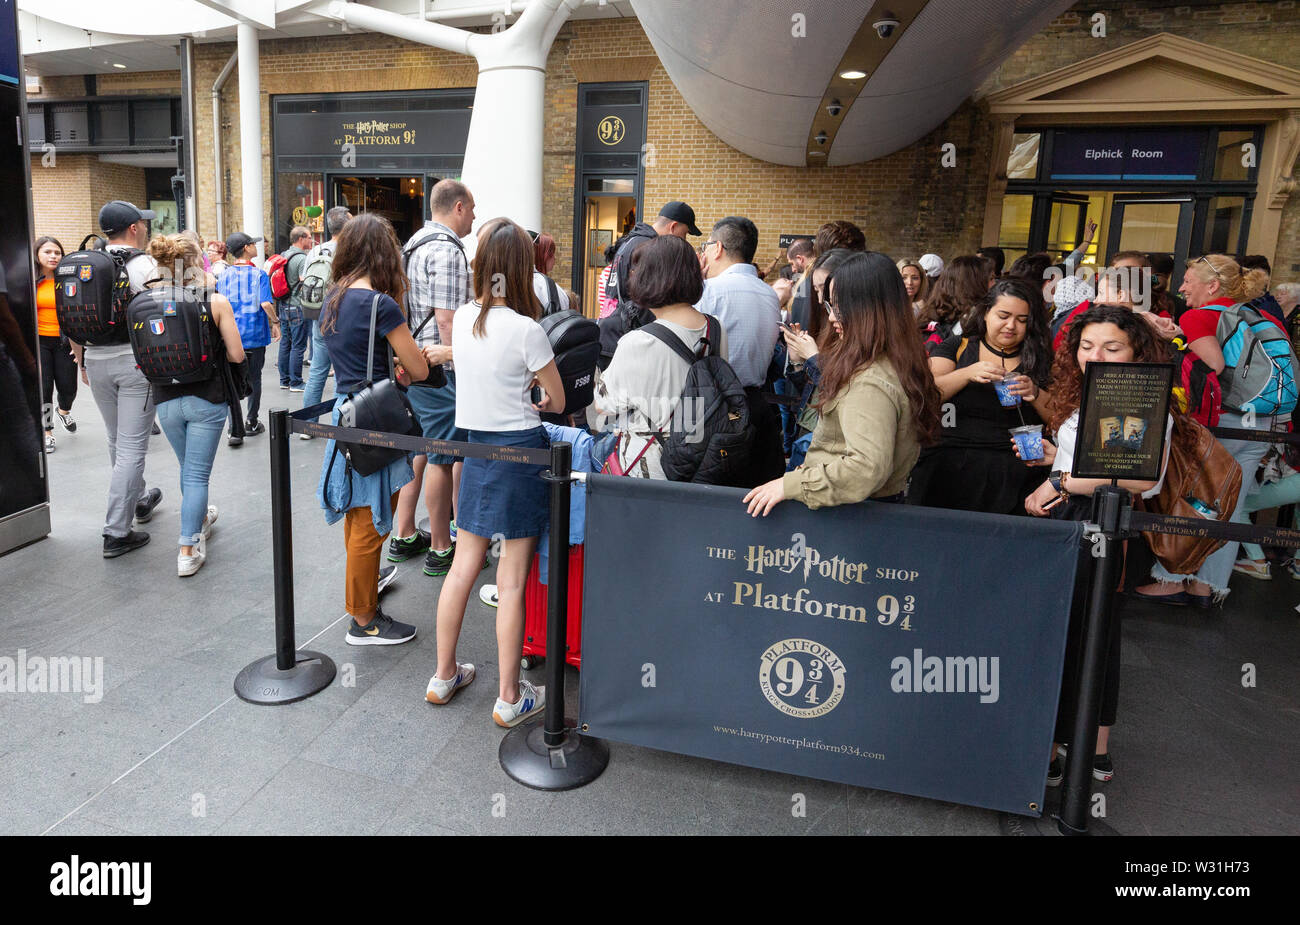 Harry Potter fans queuing in a queue outside the Kings Cross Station Harry Potter shop at Platform 9 3/4, Kings Cross Rail station, London UK Stock Photo